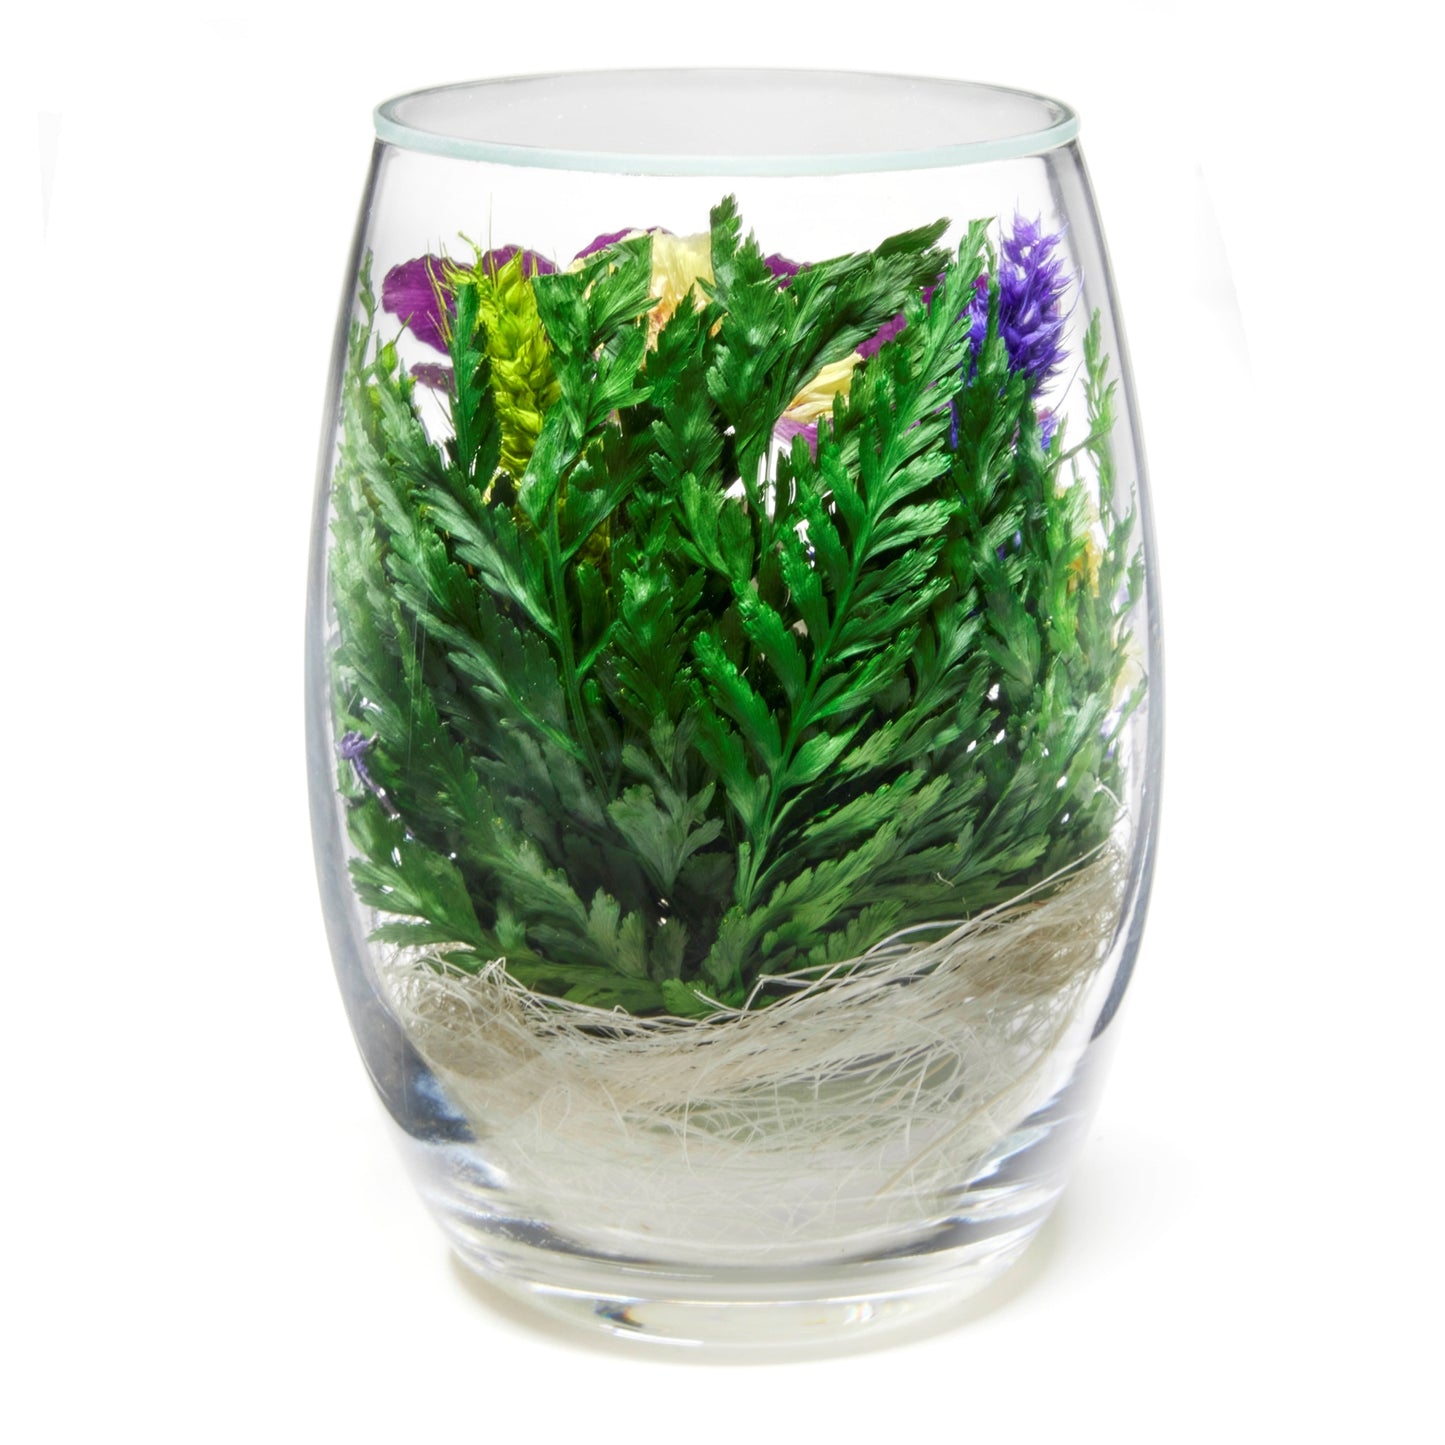 In Flores Veritas: Trio of Eternal Orchids in Glass-like Vase - Lasts up to 5 Years - Unique Gift for Any Occasion